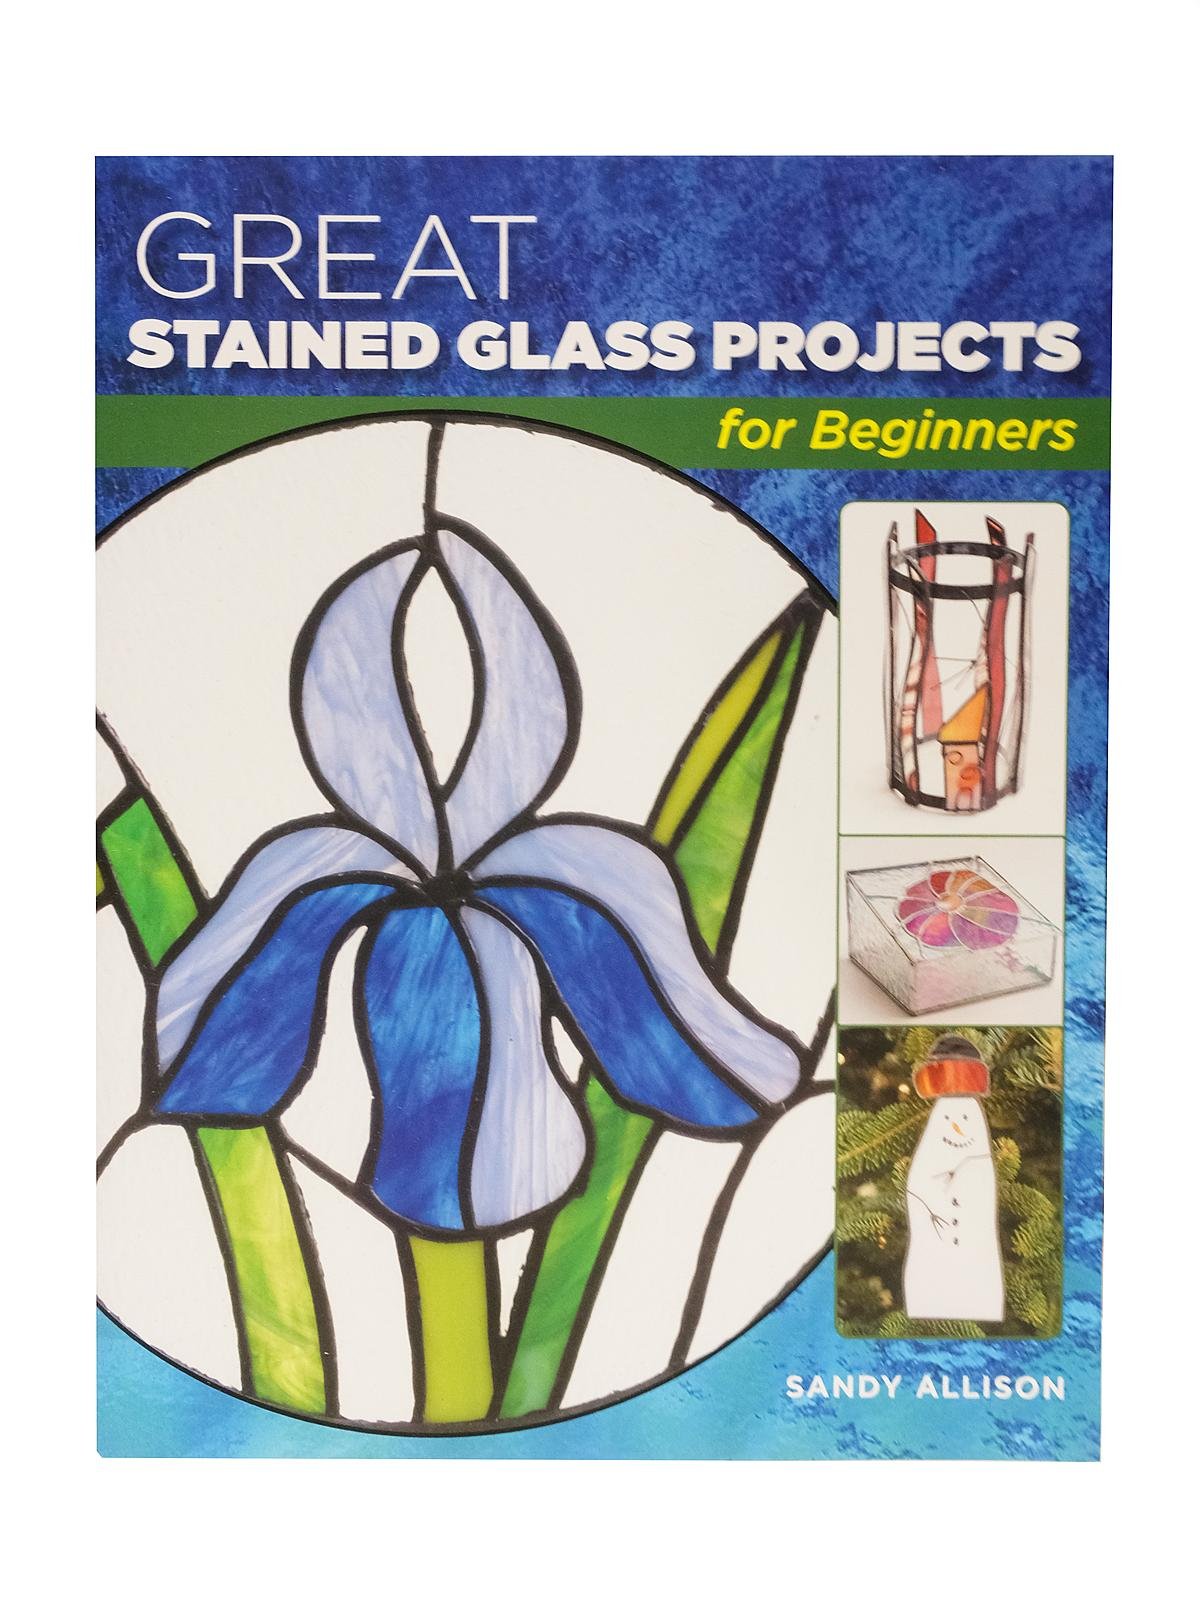 Stackpole Books - Great Stained Glass Projects for Beginners